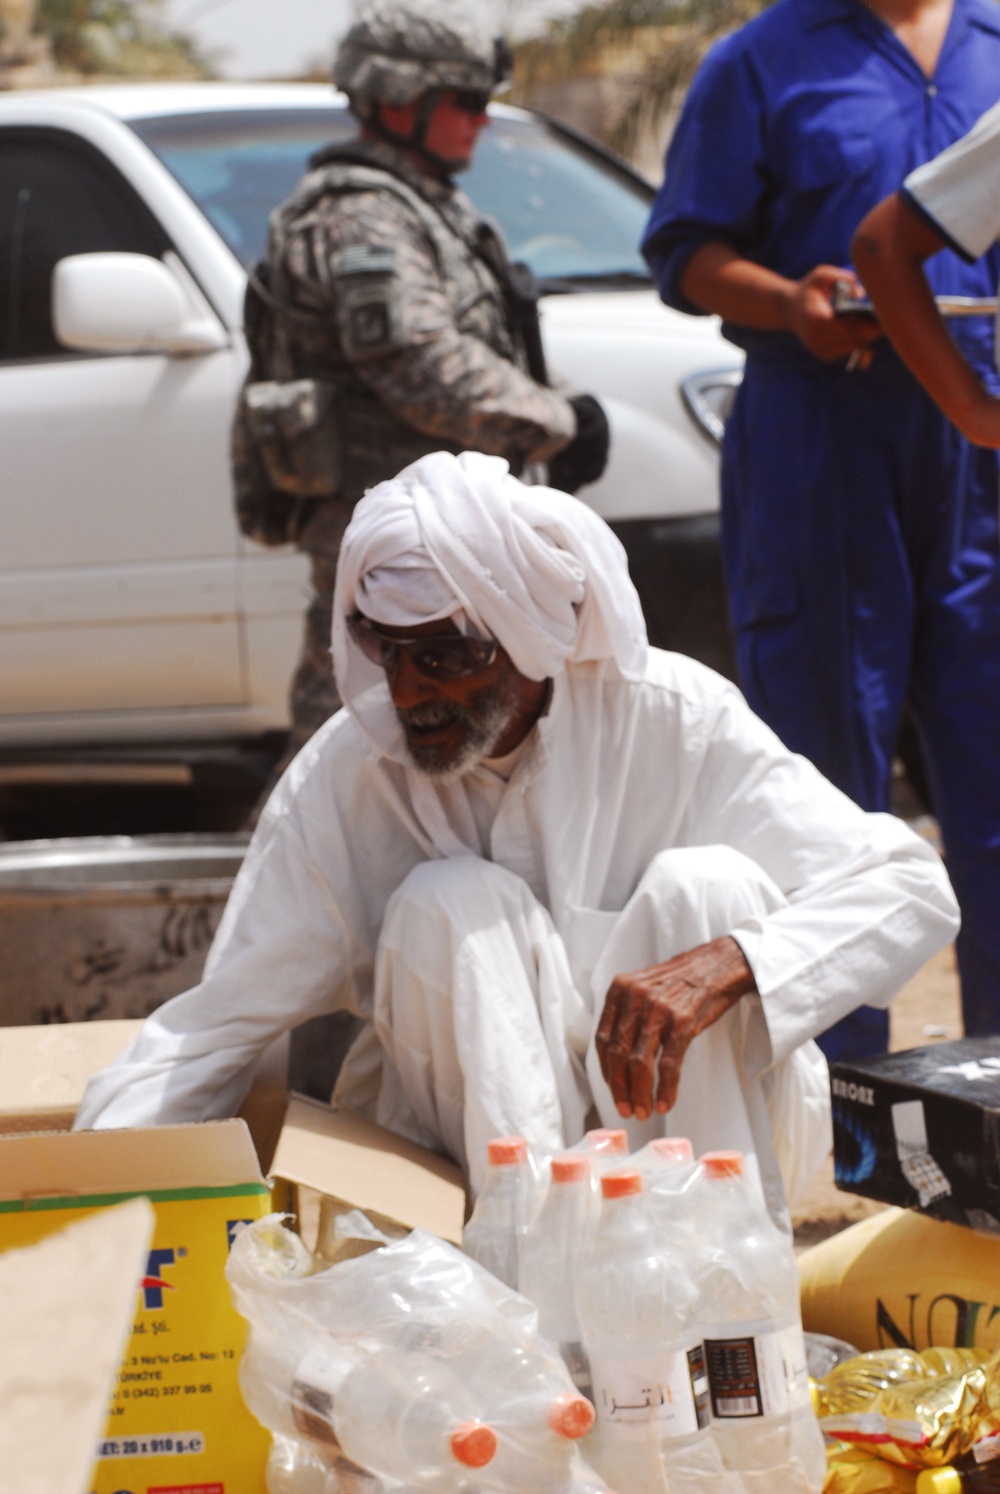 Soldiers provide goods, goodwill to Basra citizens